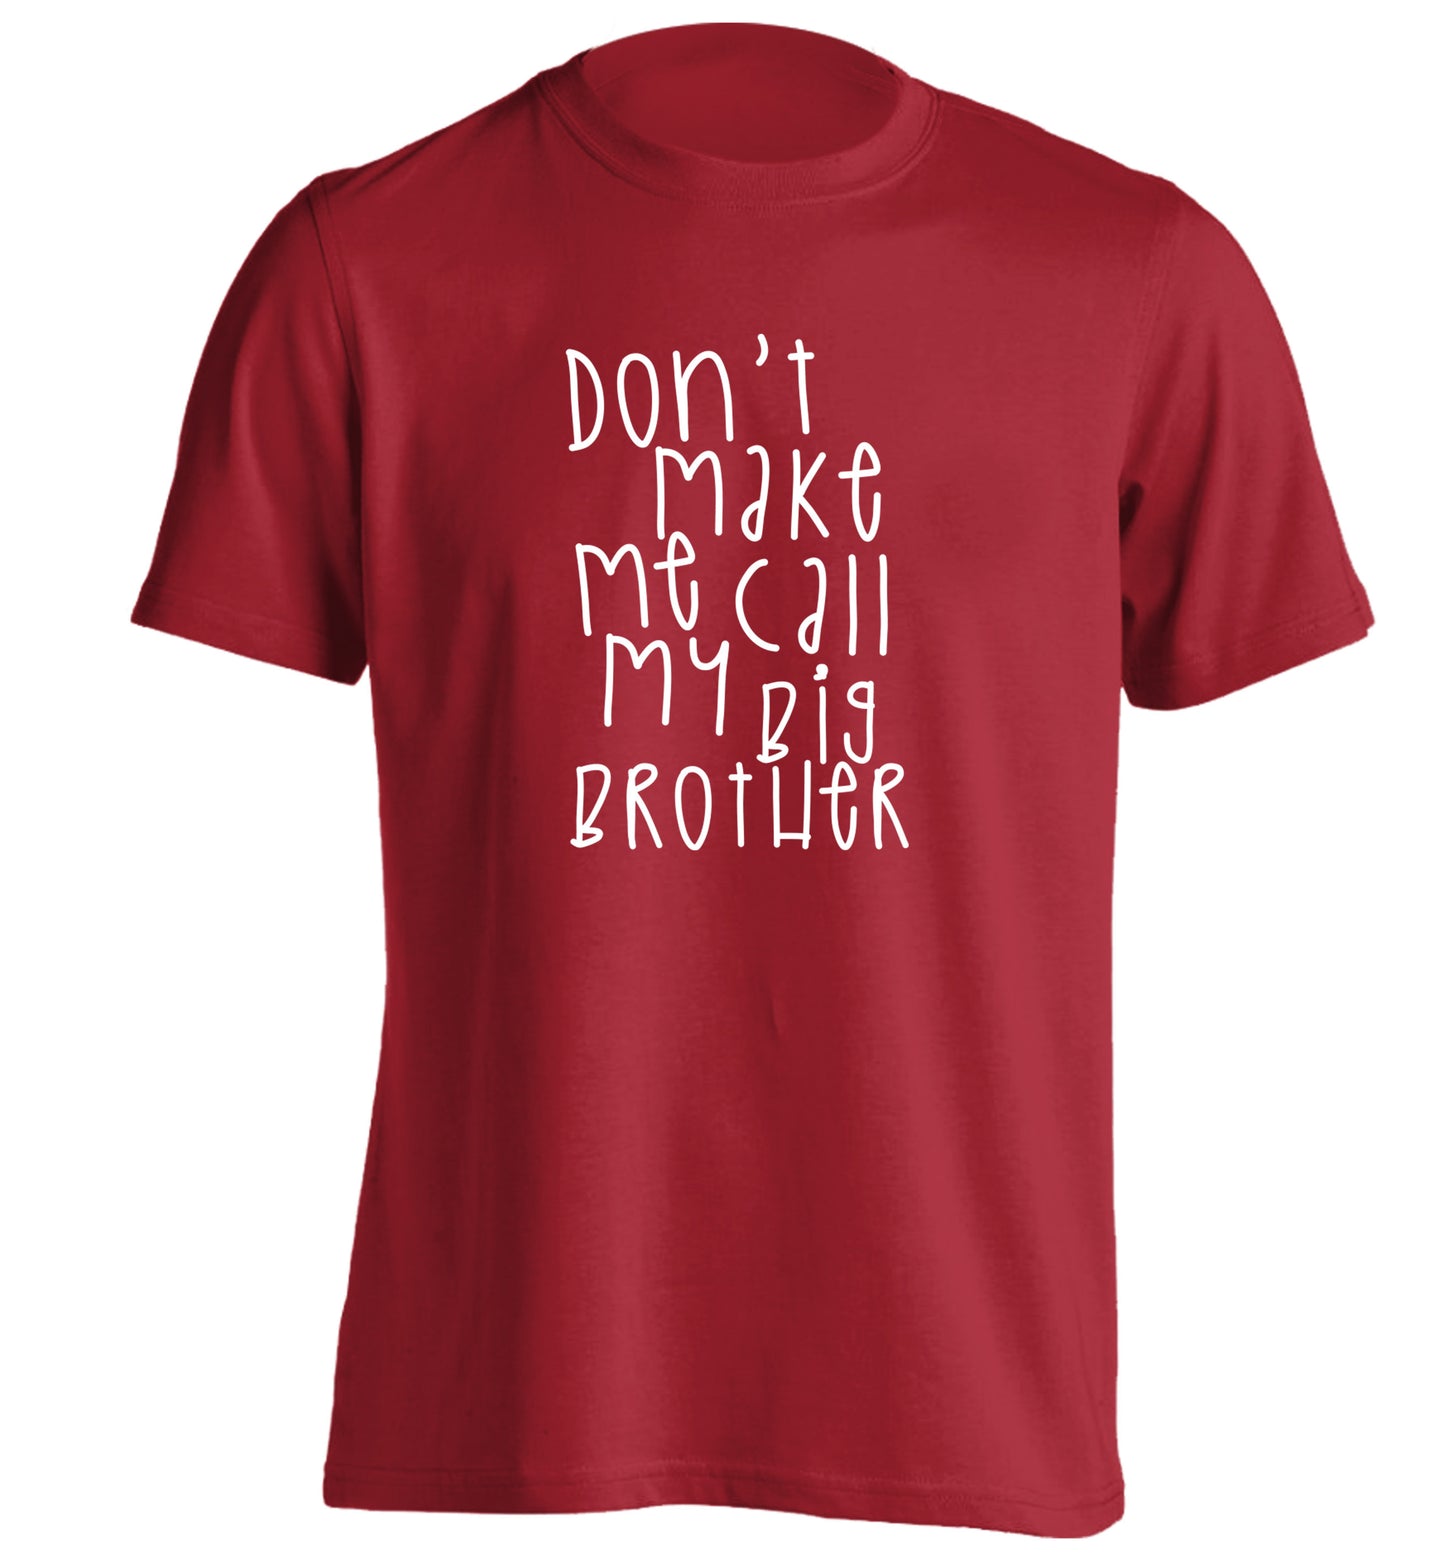 Don't make me call my big brother adults unisex red Tshirt 2XL